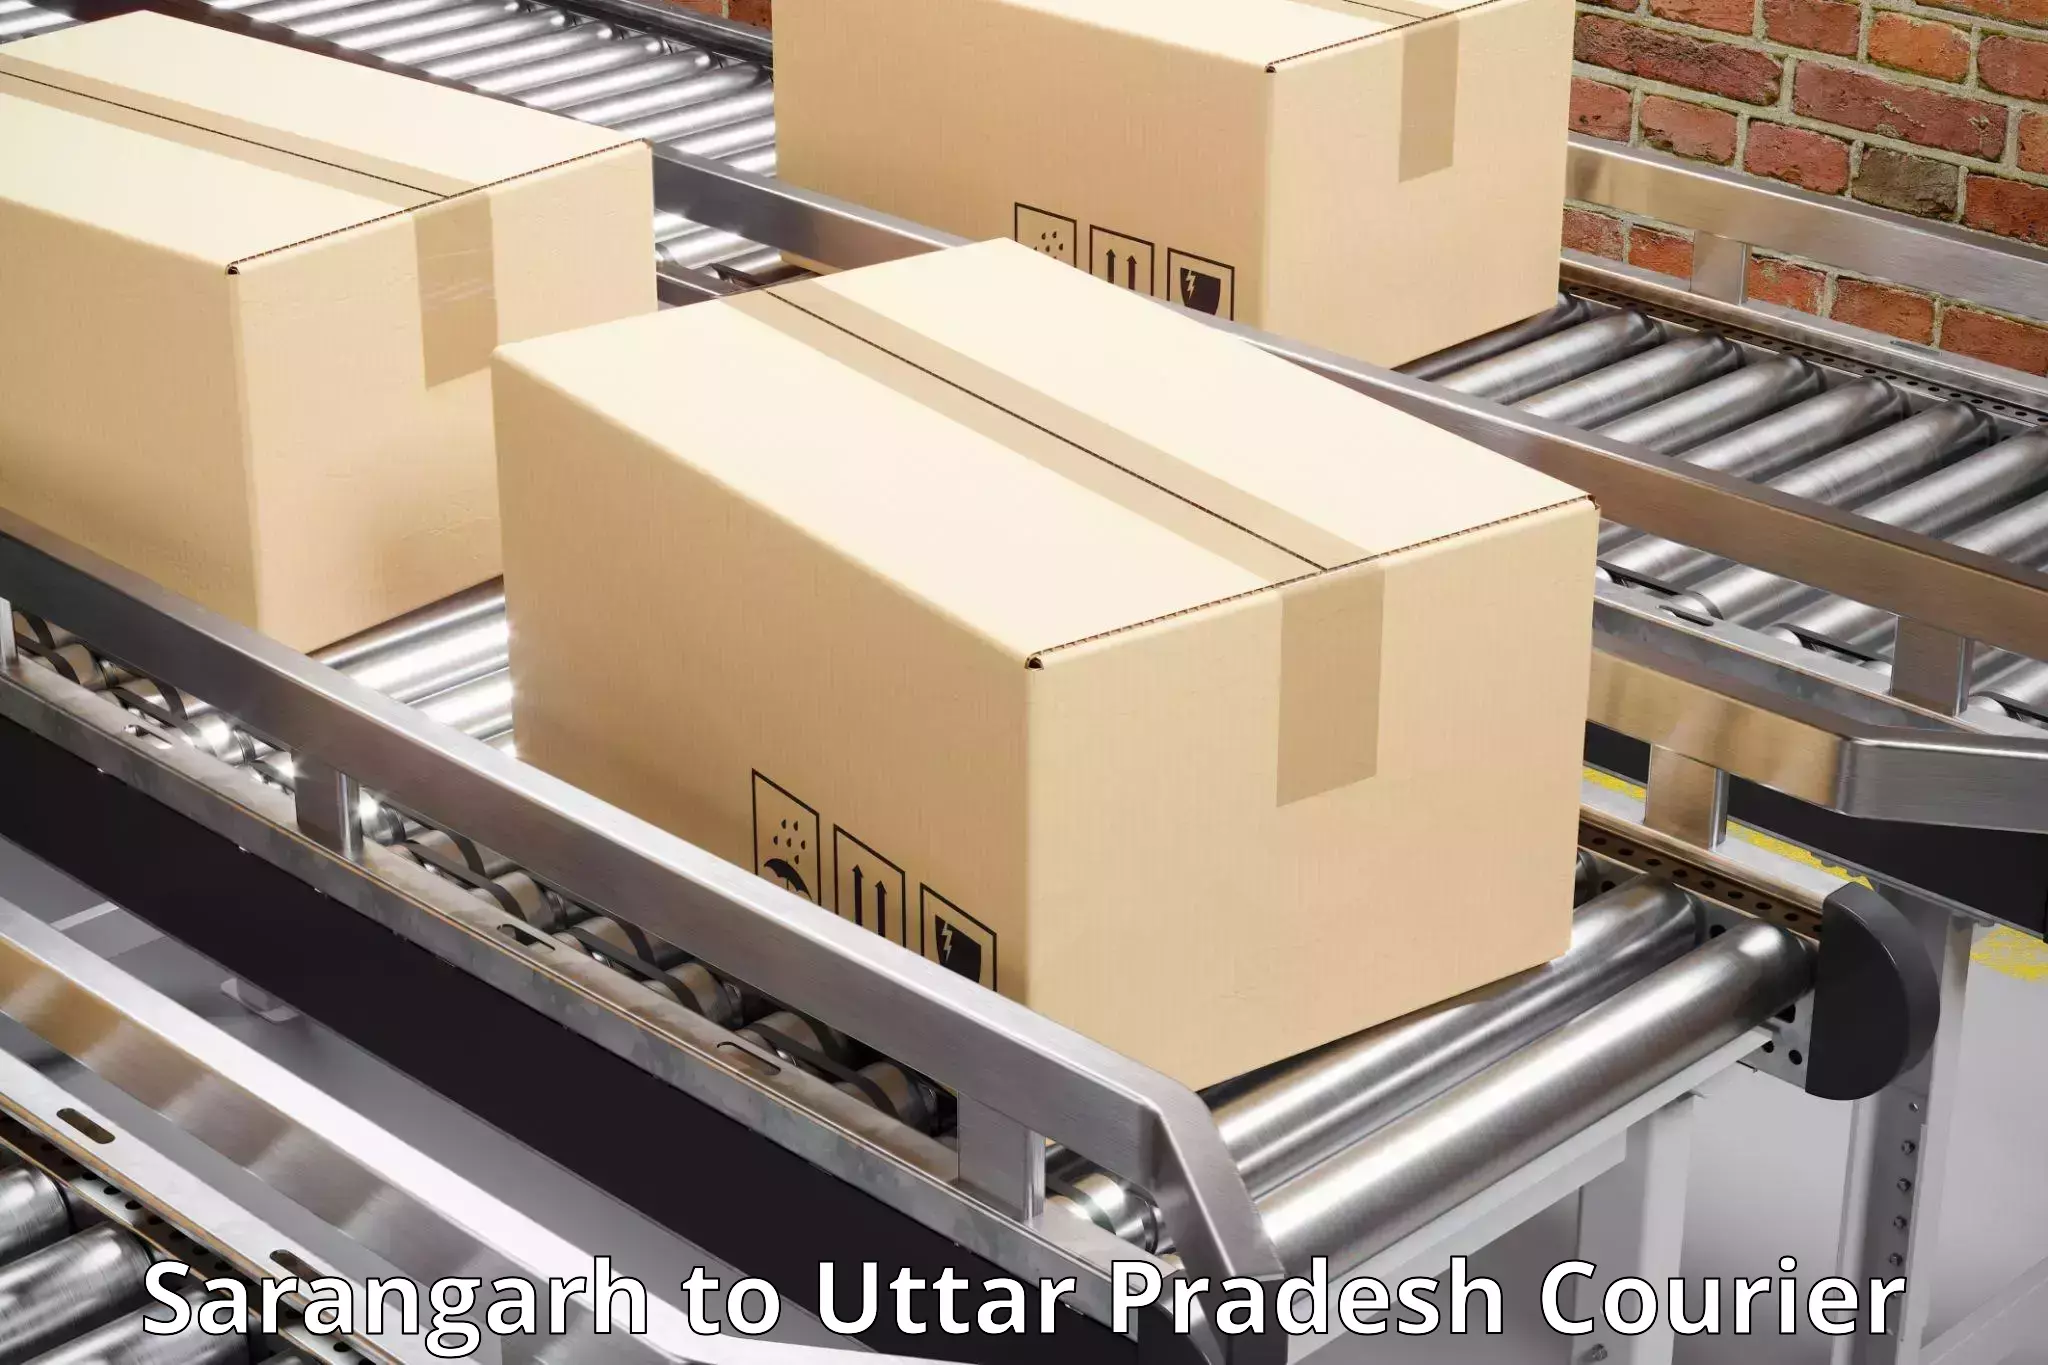 Cost-effective courier options Sarangarh to Chunar